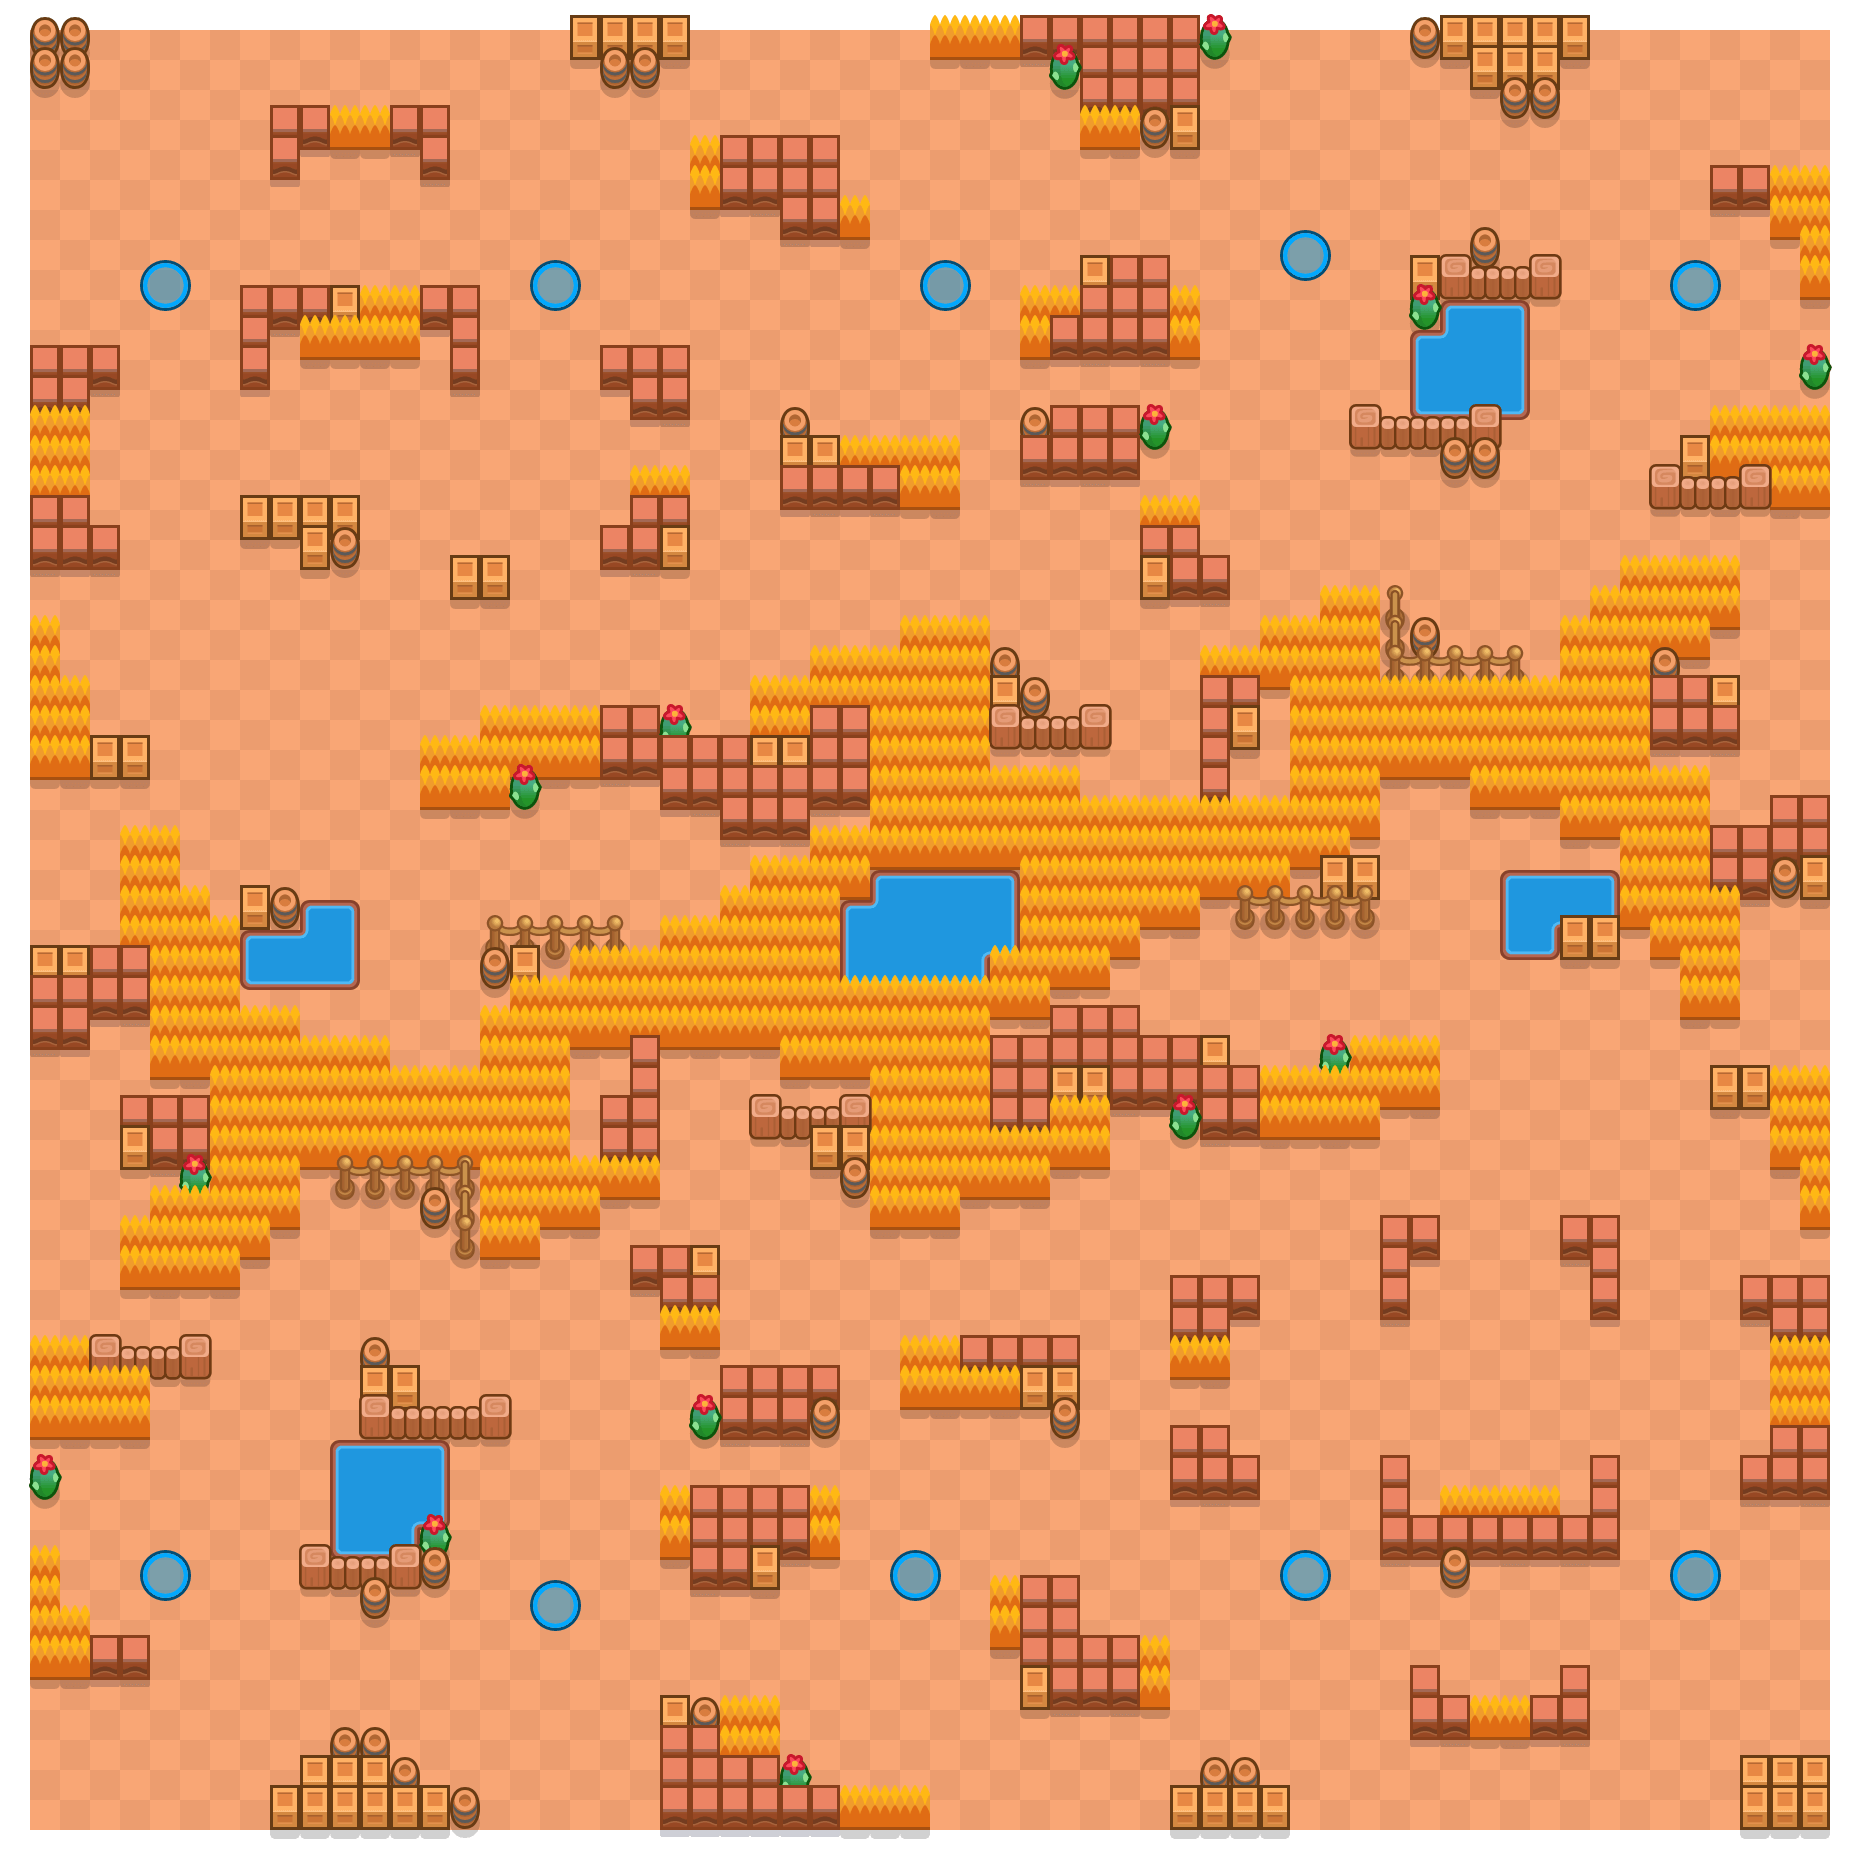 Wahrer Weg is a Jäger Brawl Stars map. Check out Wahrer Weg's map picture for Jäger and the best and recommended brawlers in Brawl Stars.